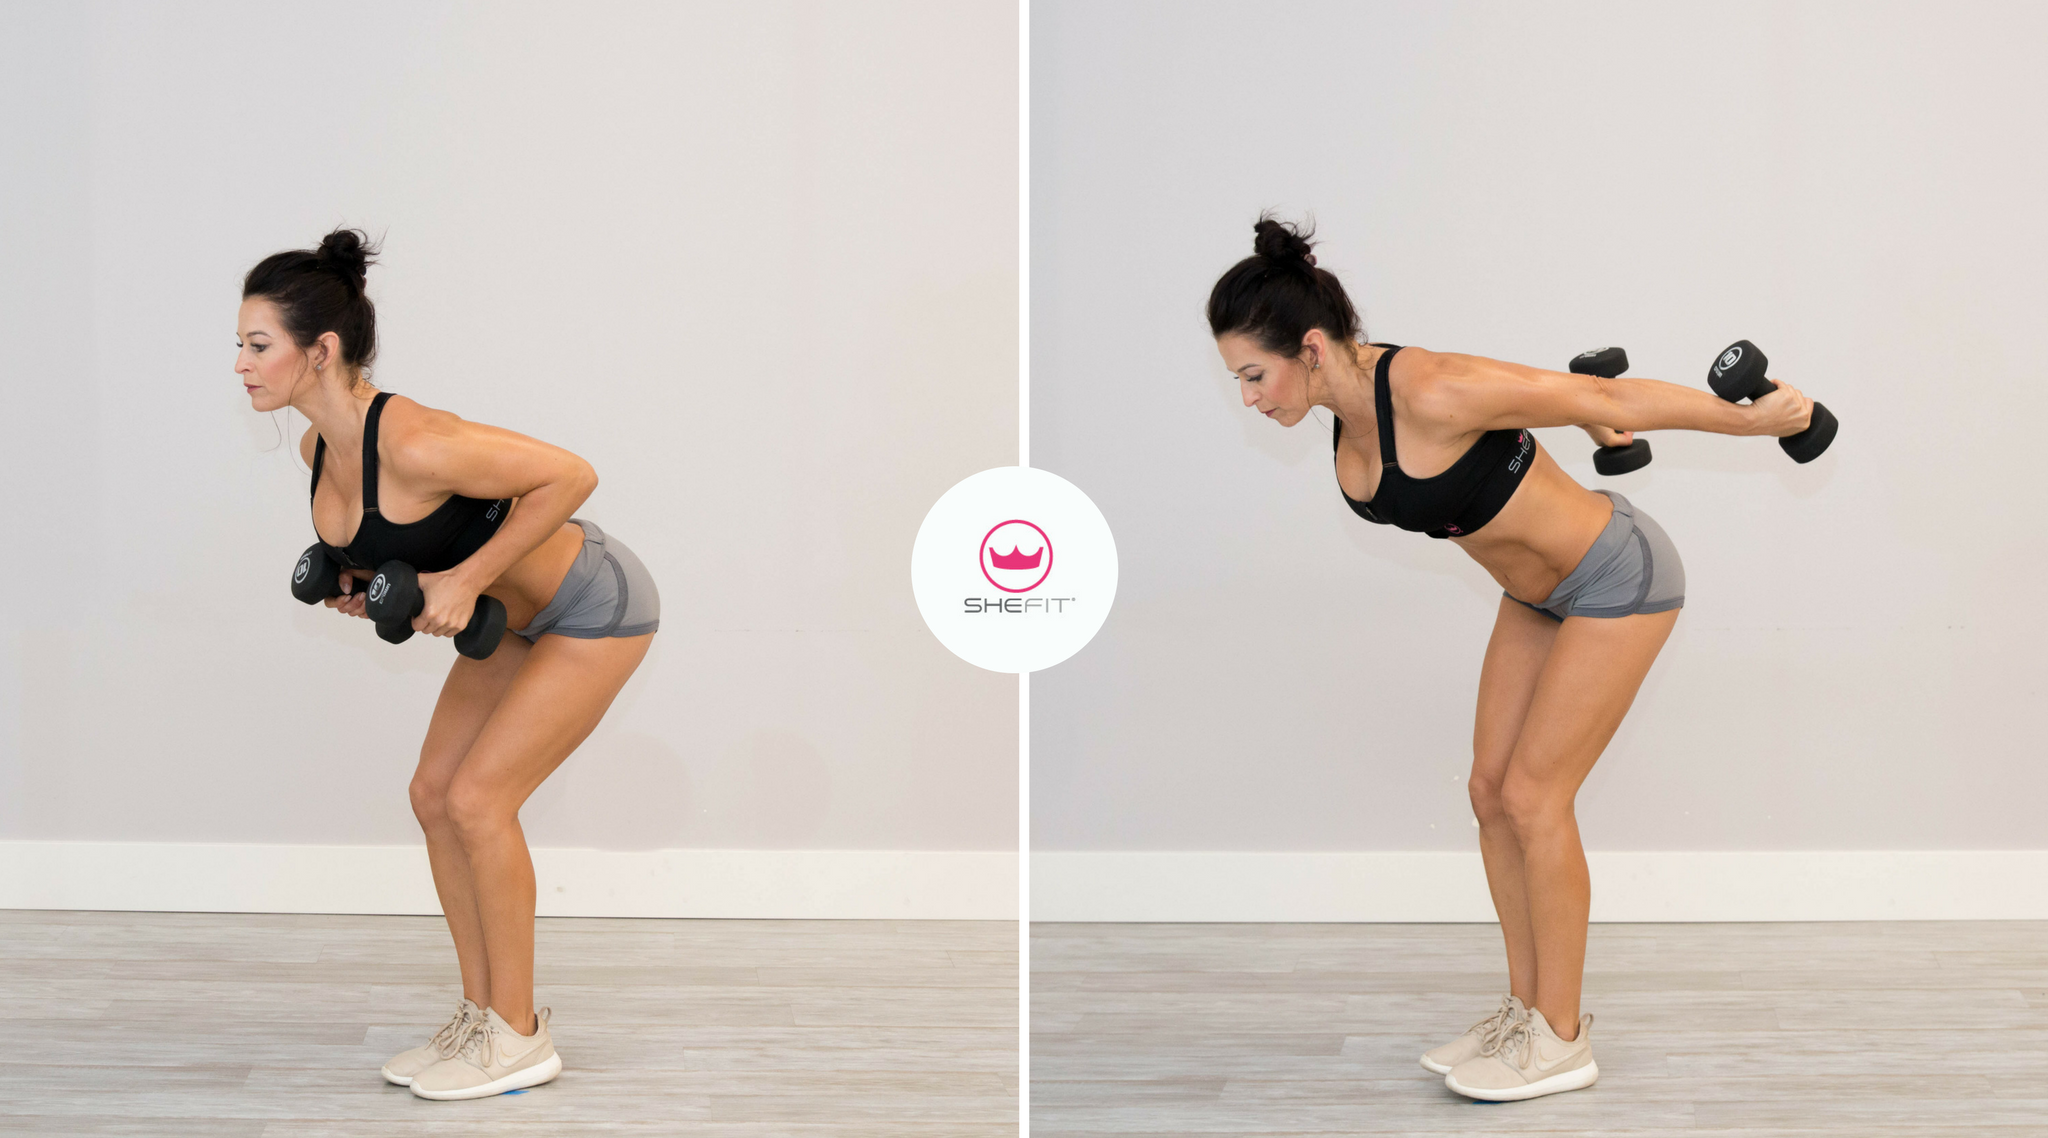 How to Get Bikini Body Ready: A Workout to Tone & Sculpt Arms